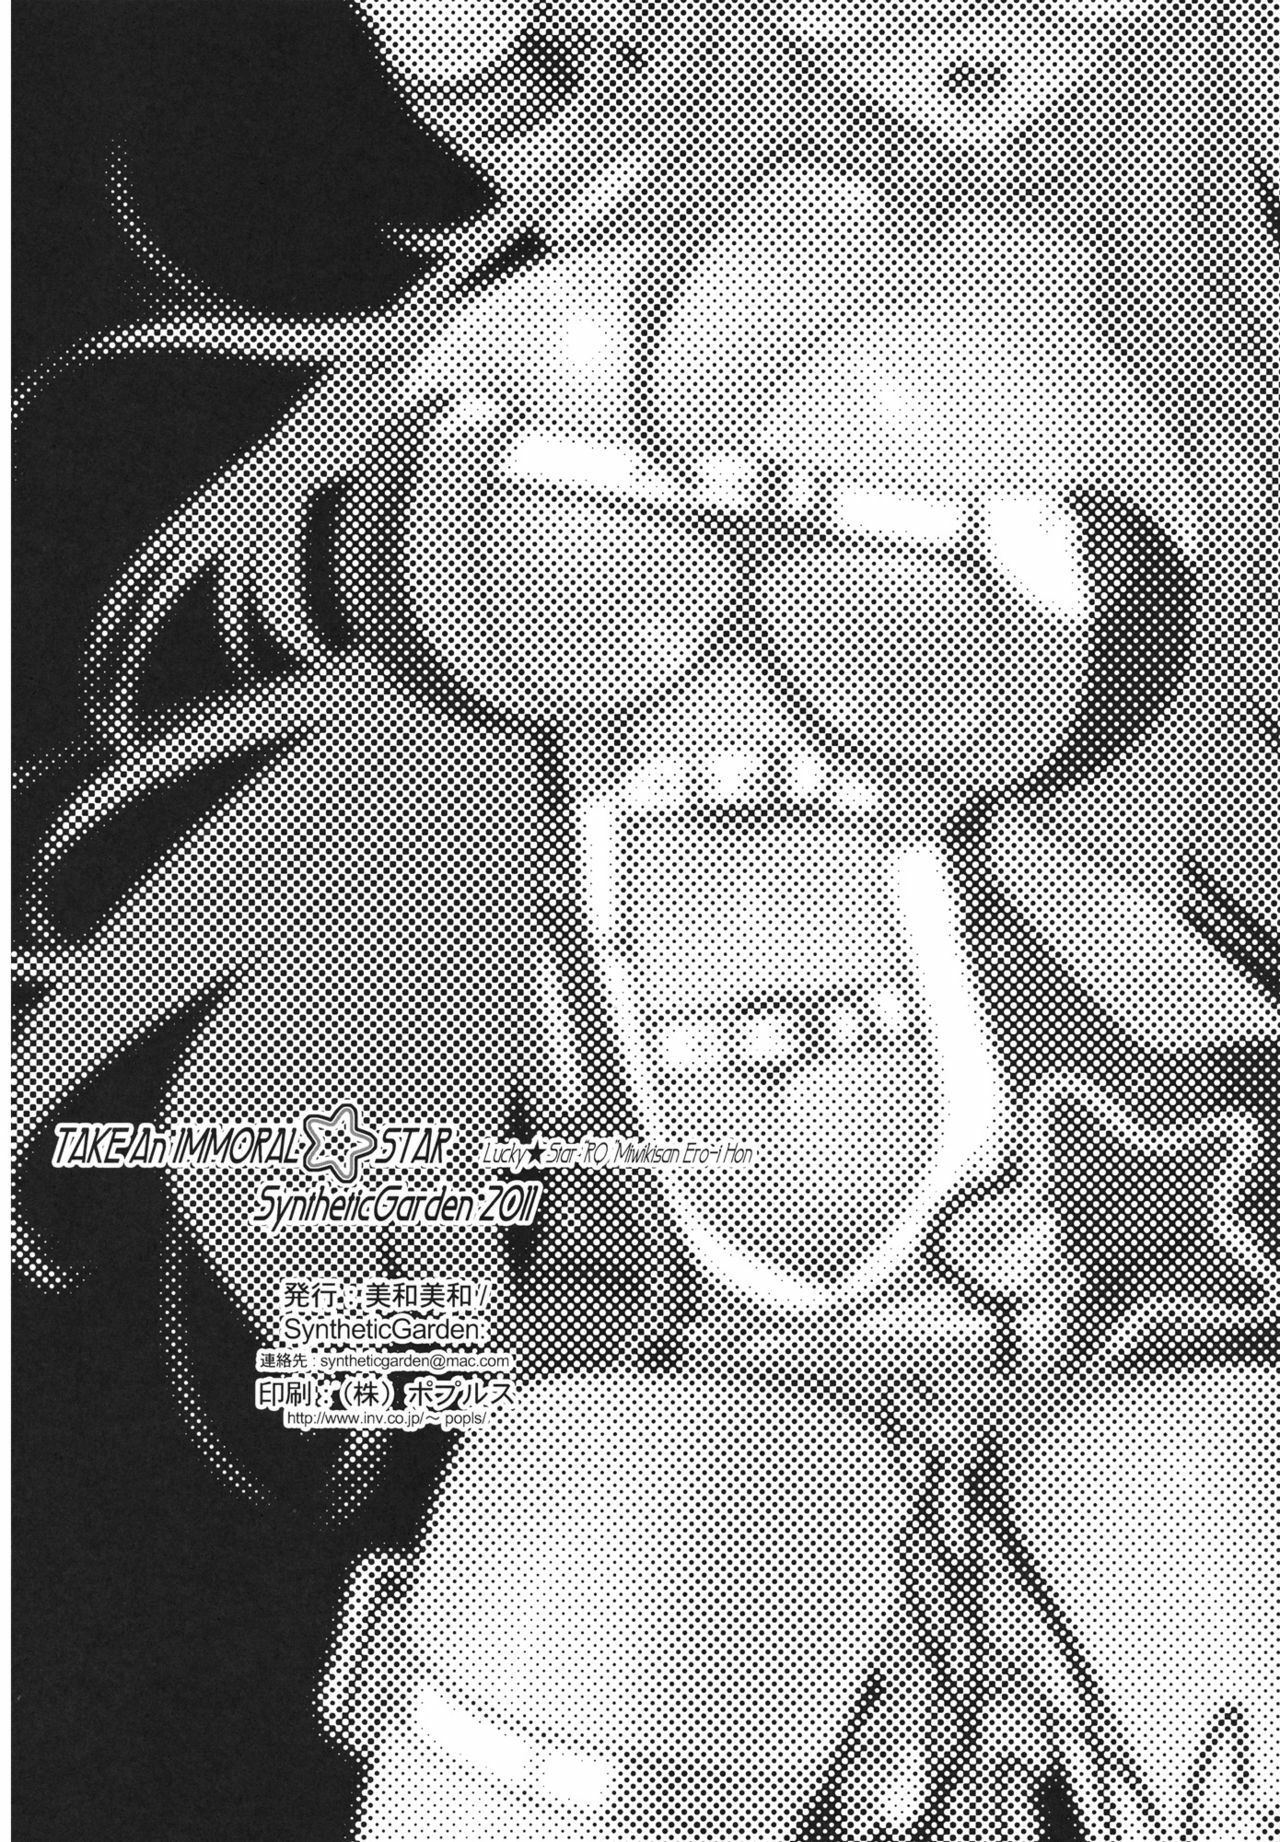 (C80) [SyntheticGarden] TAKE An IMMORAL STAR (Lucky Star) page 24 full